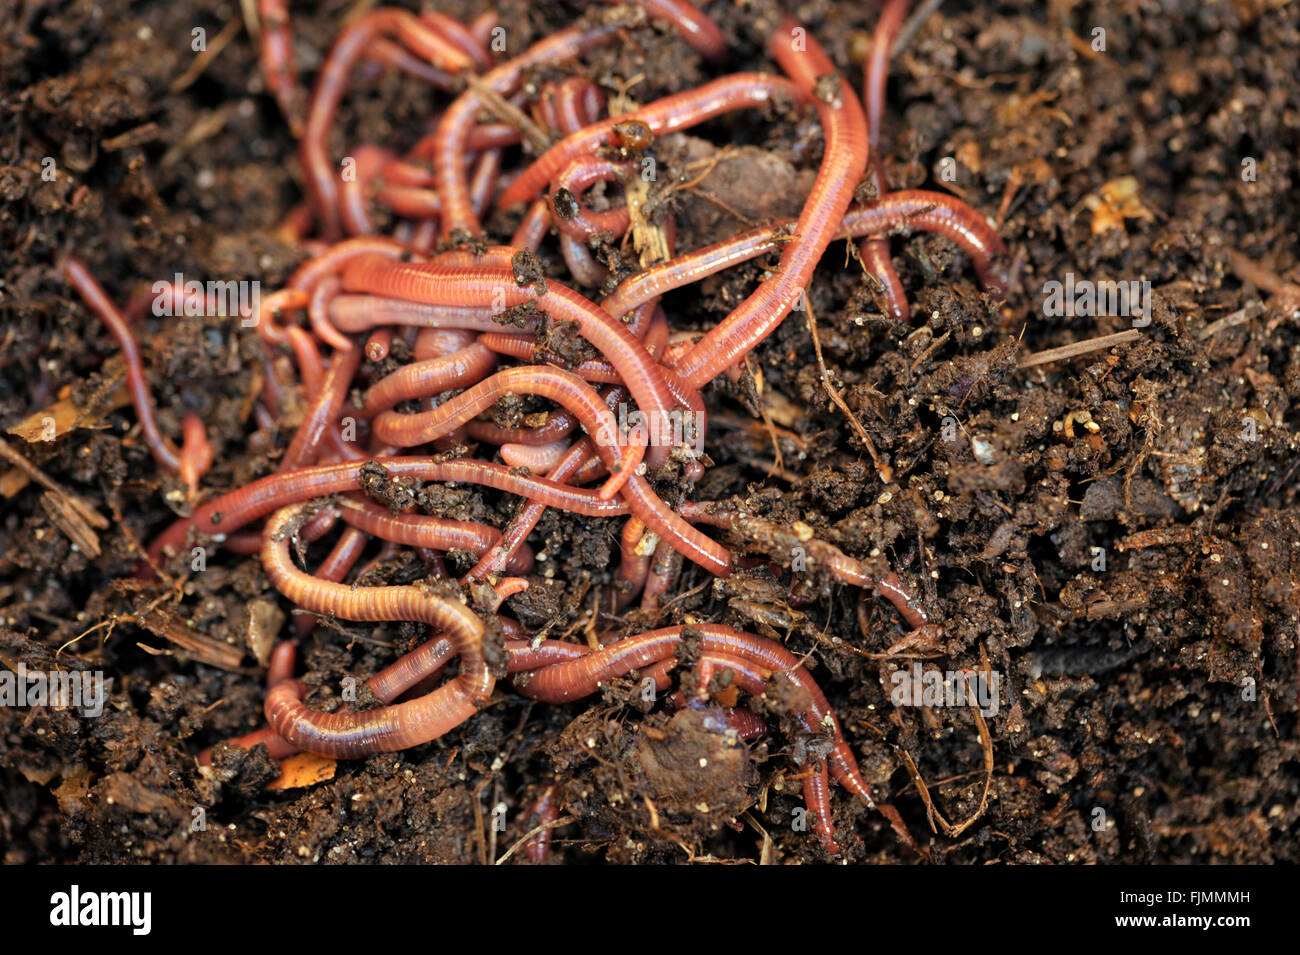 Garden compost and worms recycling plant and kitchen food waste into a rich soil improver and fertilizer. Stock Photo